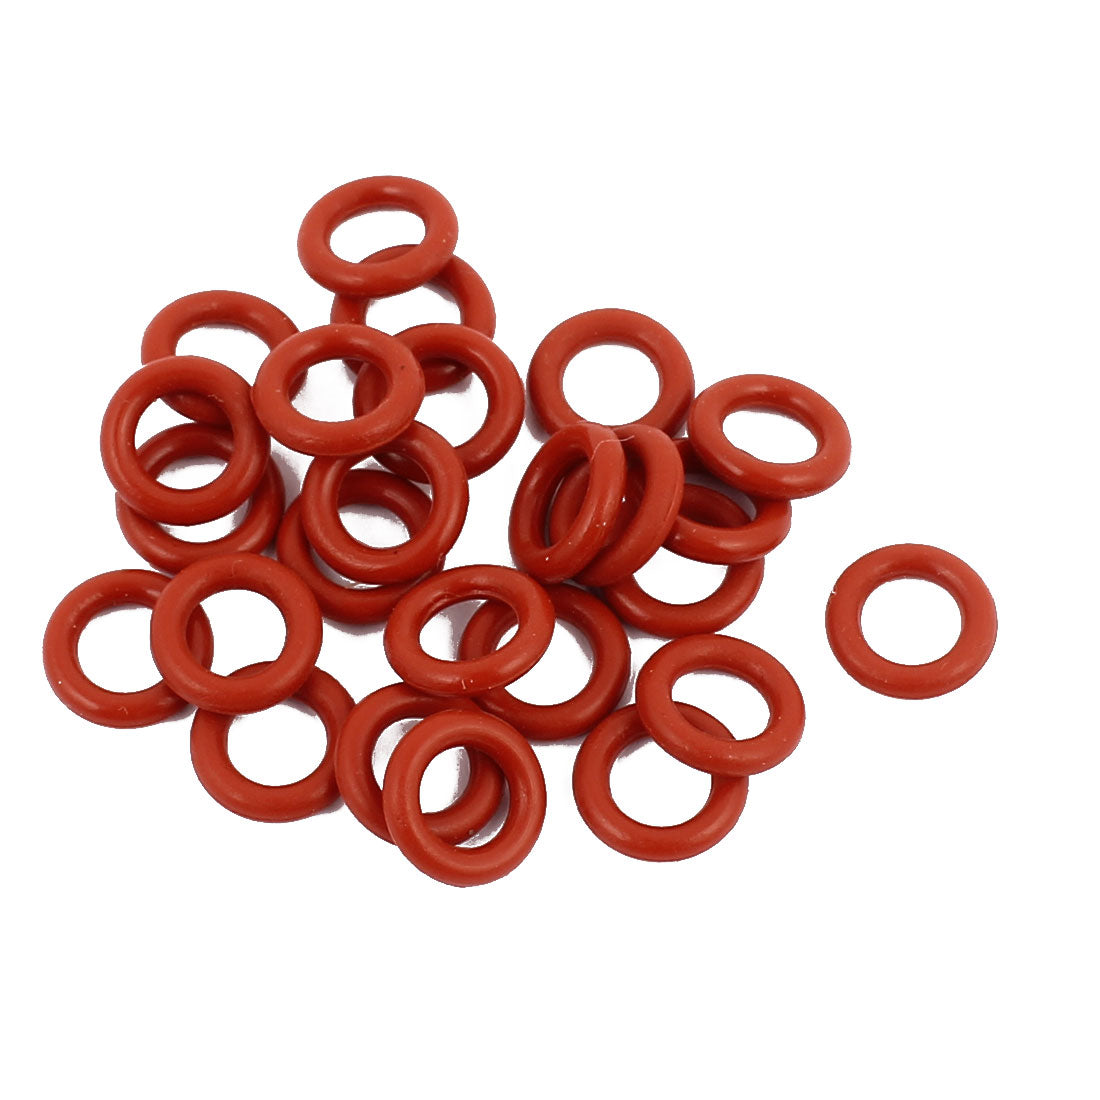 uxcell Uxcell 25pcs 9mmx1.9mm Heat Resistant Silicone O Ring Oil Sealing Ring Gasket Red